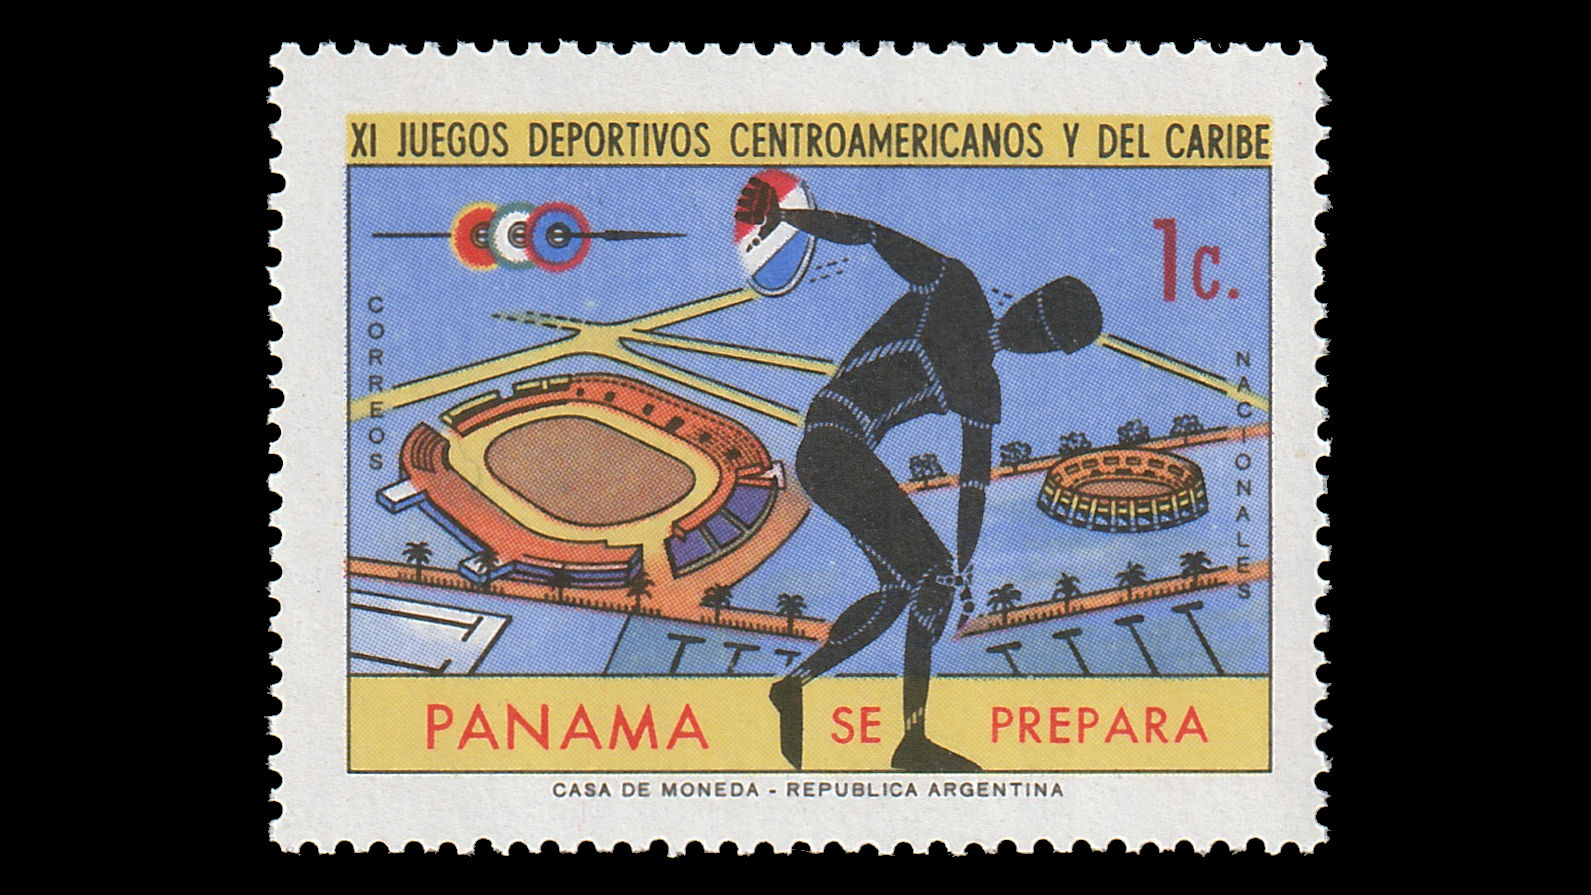 1970 Central American and Caribbean Games